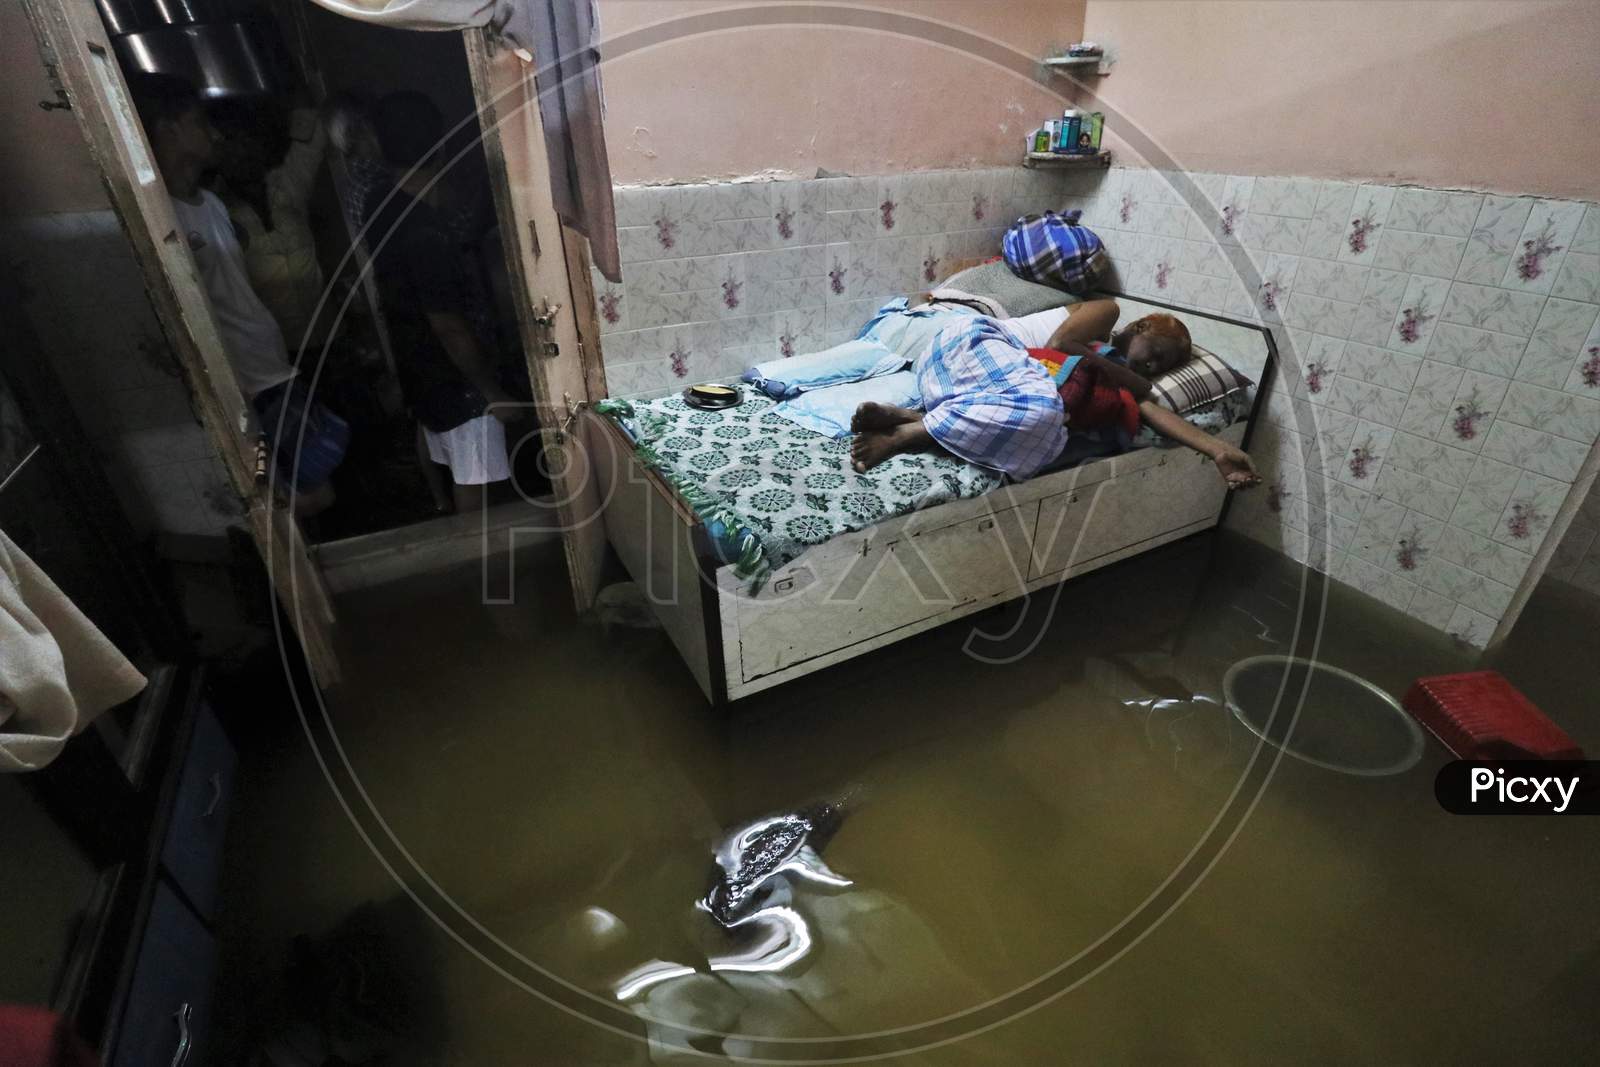 A man is seen sleeping on a bed inside his house that is waterlogged due heavy rains, in Mumbai, India on September 23, 2020.